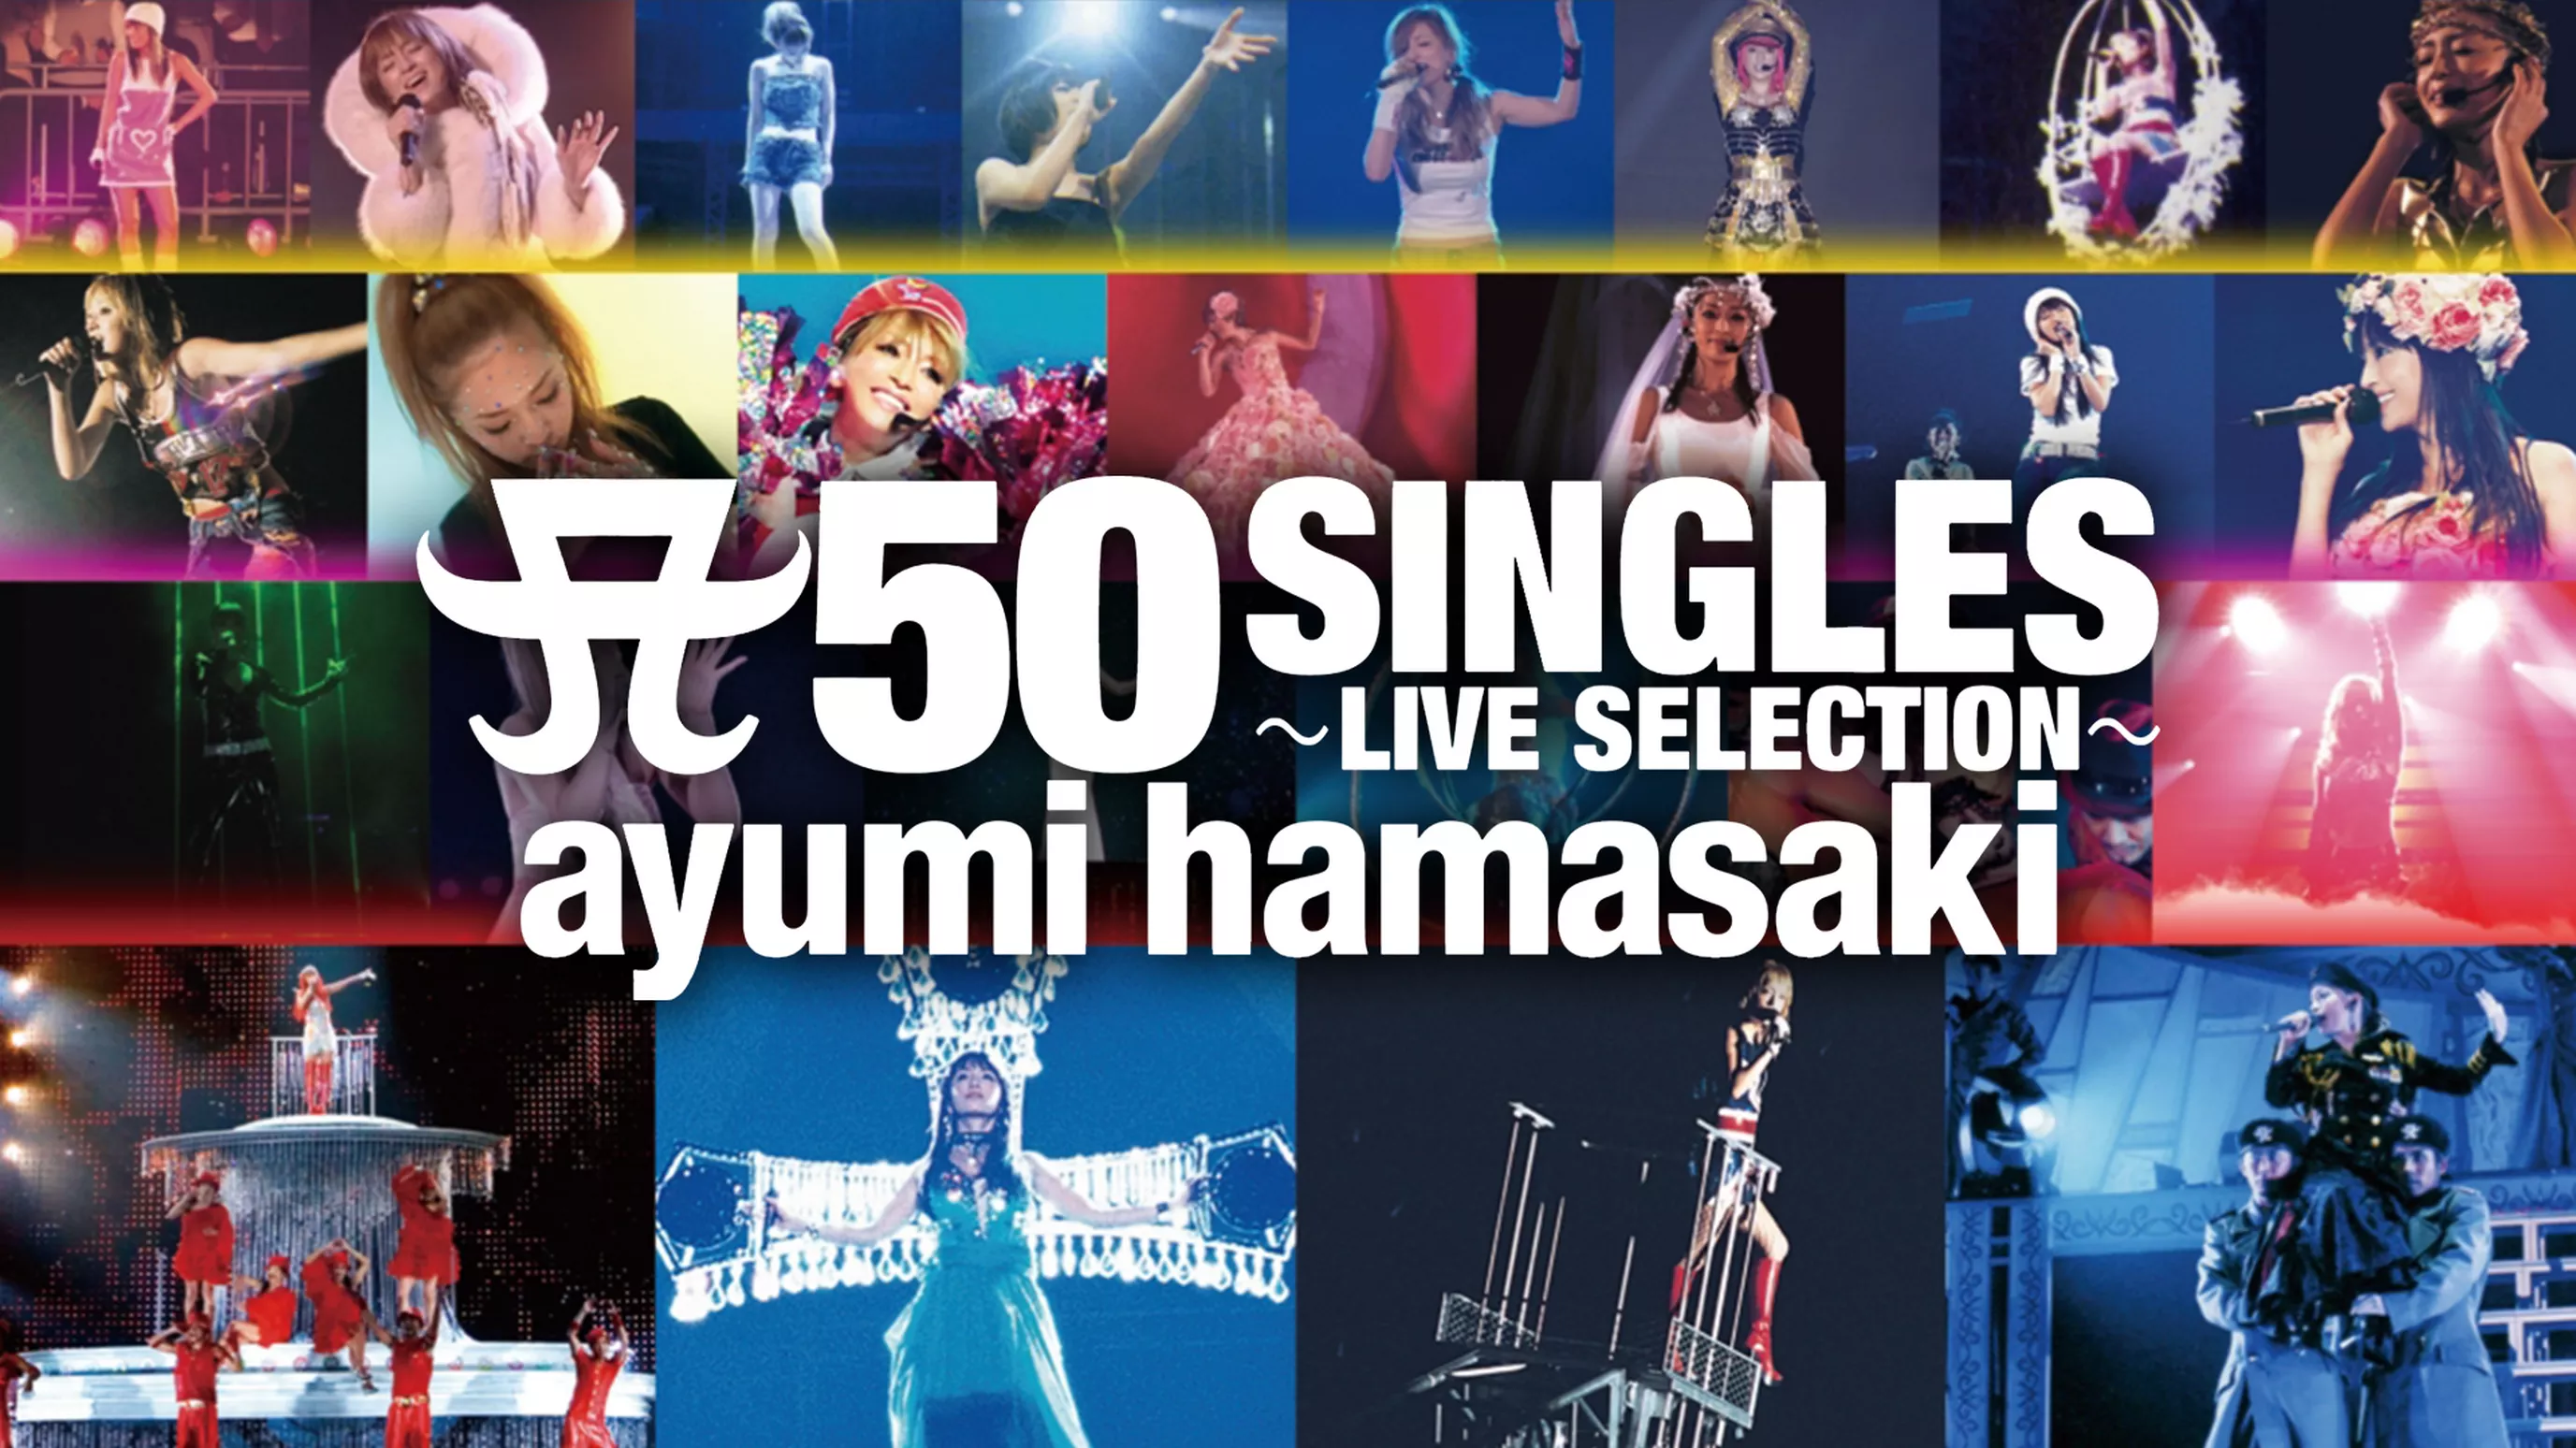 A（ロゴ表記） 50 SINGLES ～LIVE SELECTION～ [DVD] wgteh8f